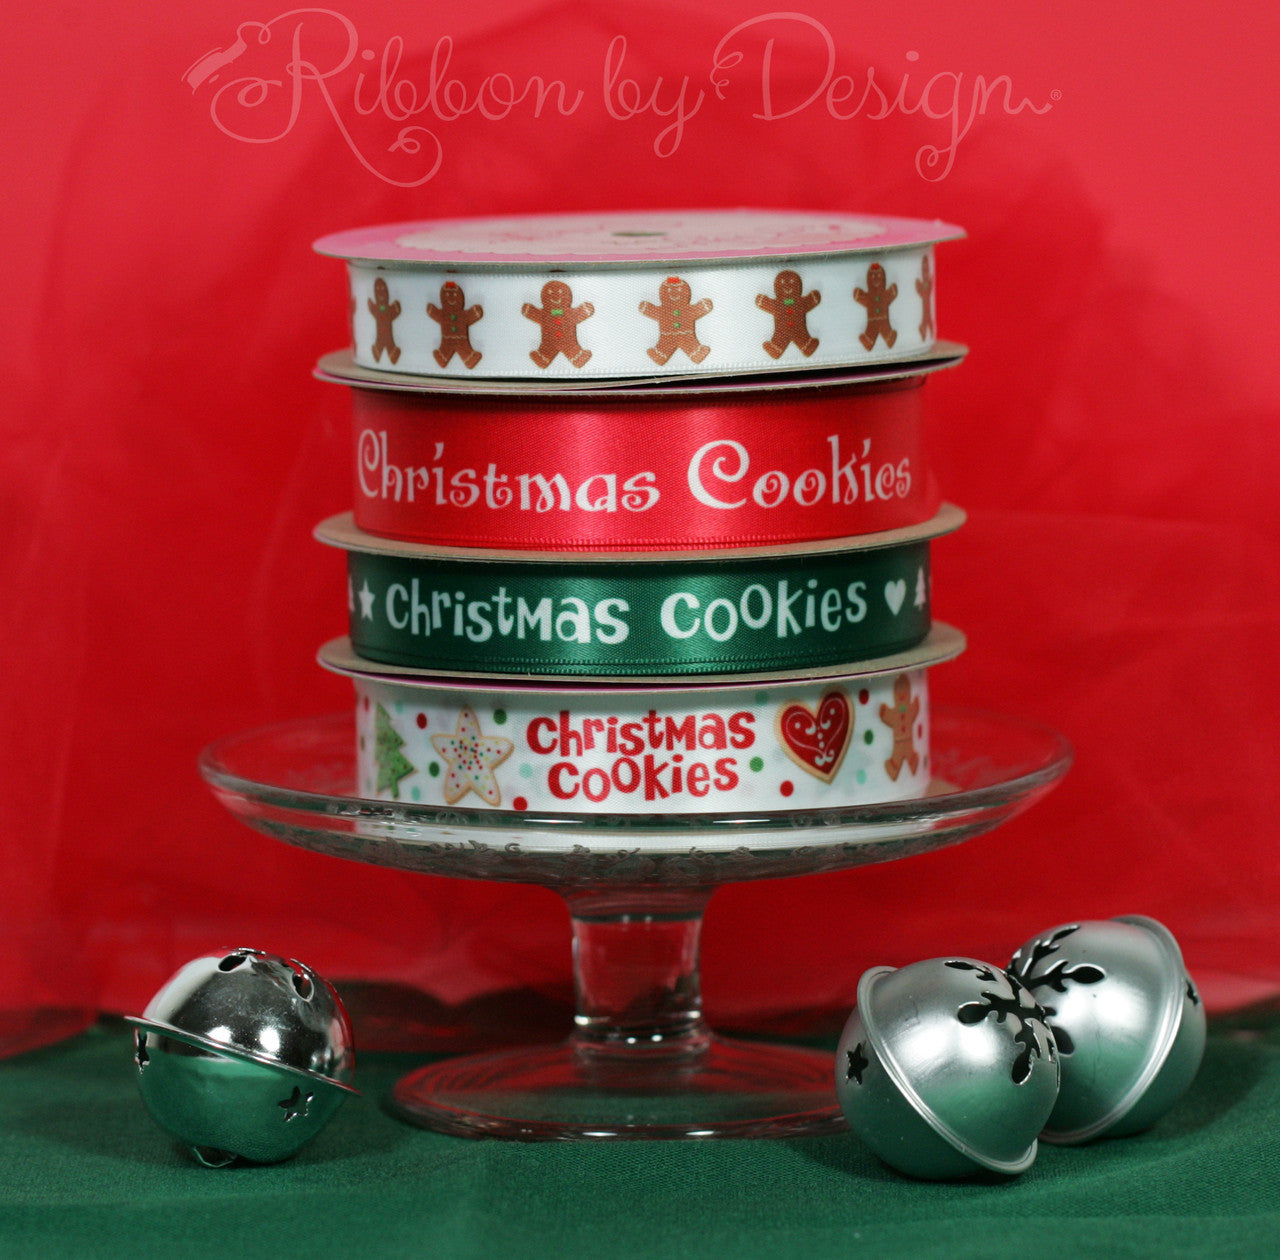 Our collection of Christmas Cookies includes our fun gingerbread men dancing along 5/8" white satin ribbon!